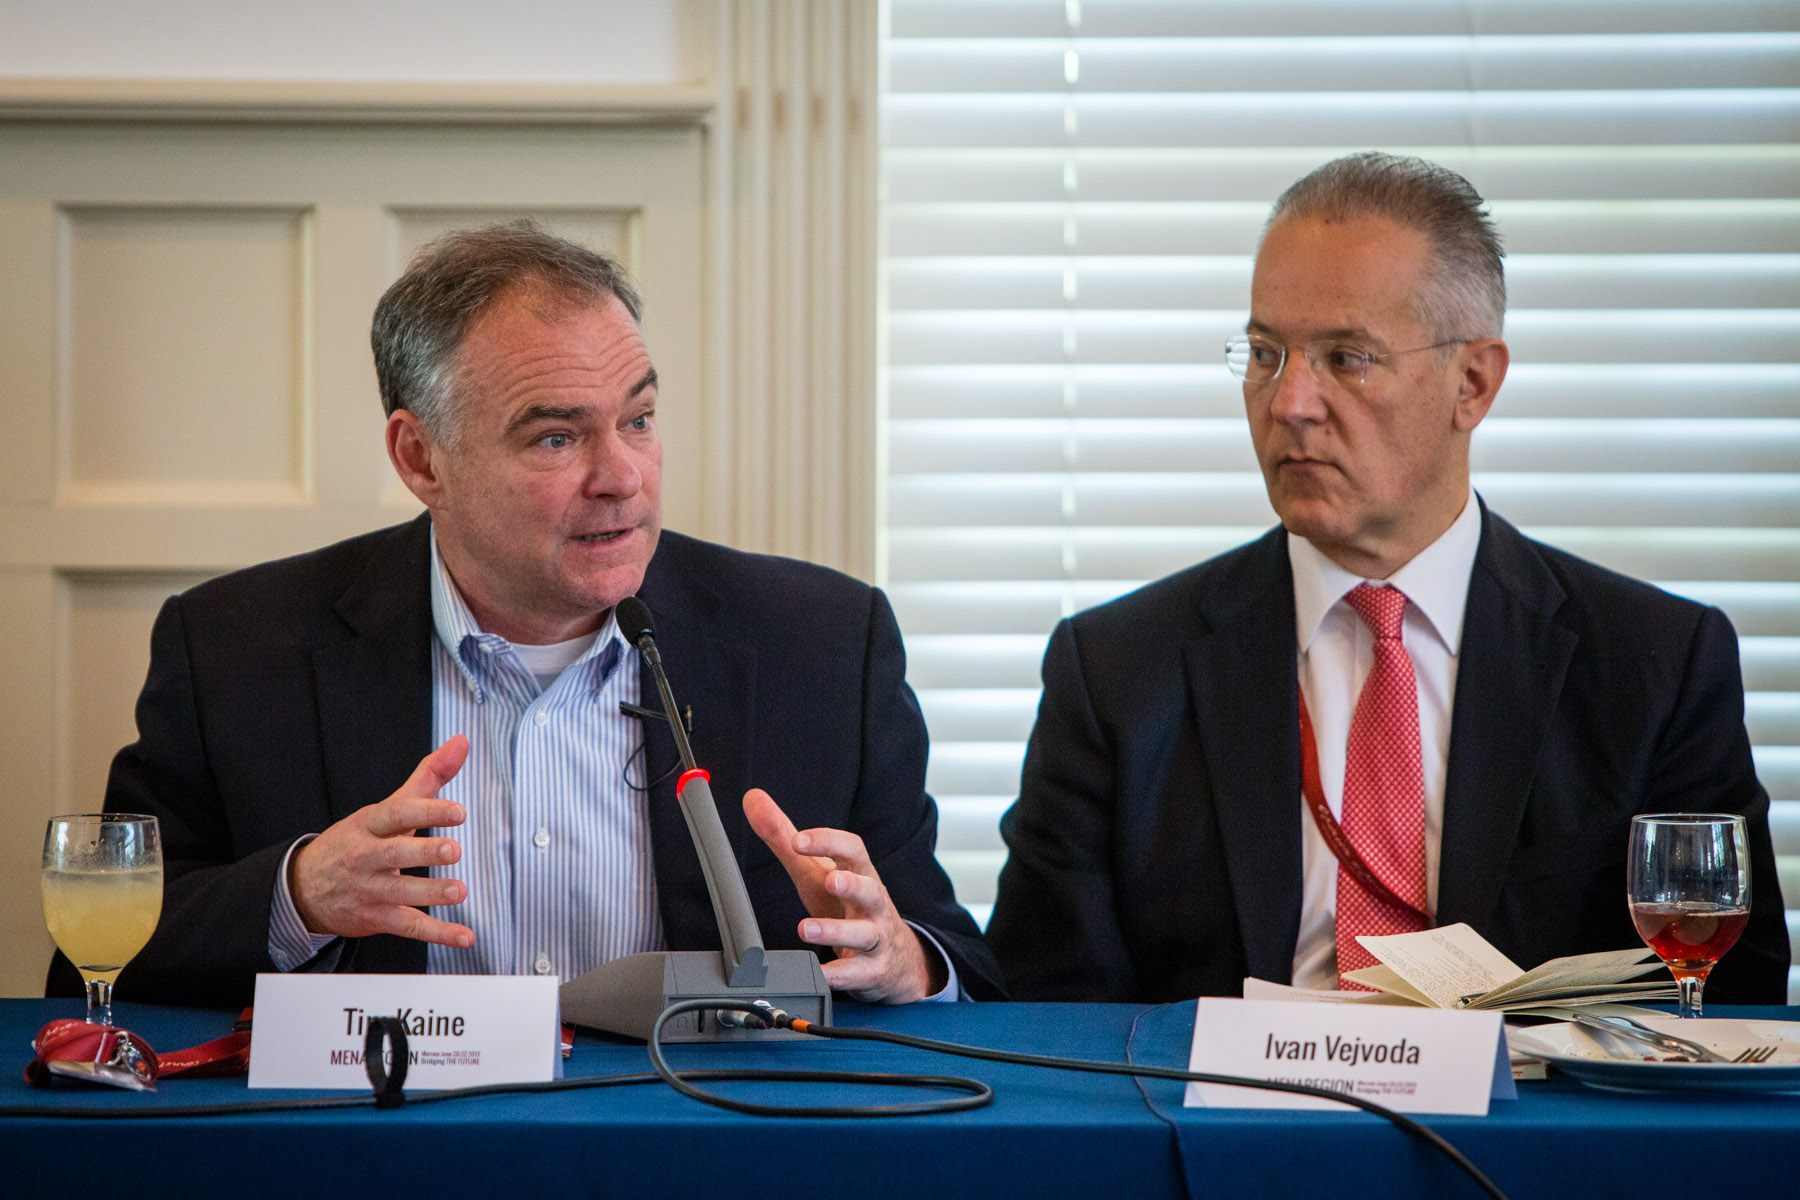 Sen. Tim Kaine (left) speaks to an audience from a panelist table